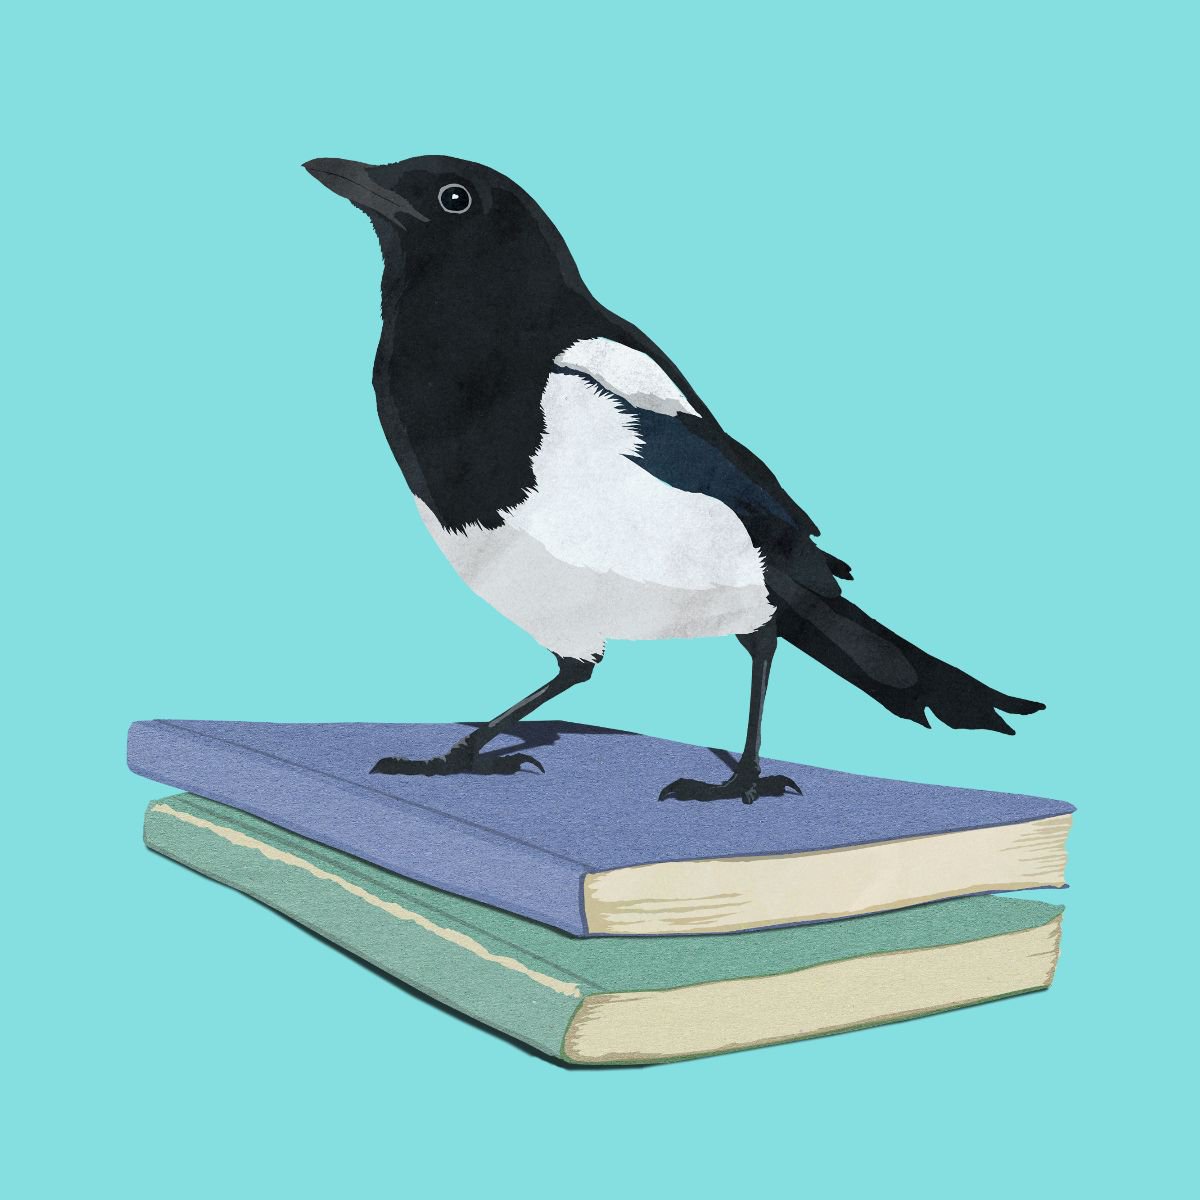 The Magpie Librarian by Peter Walters